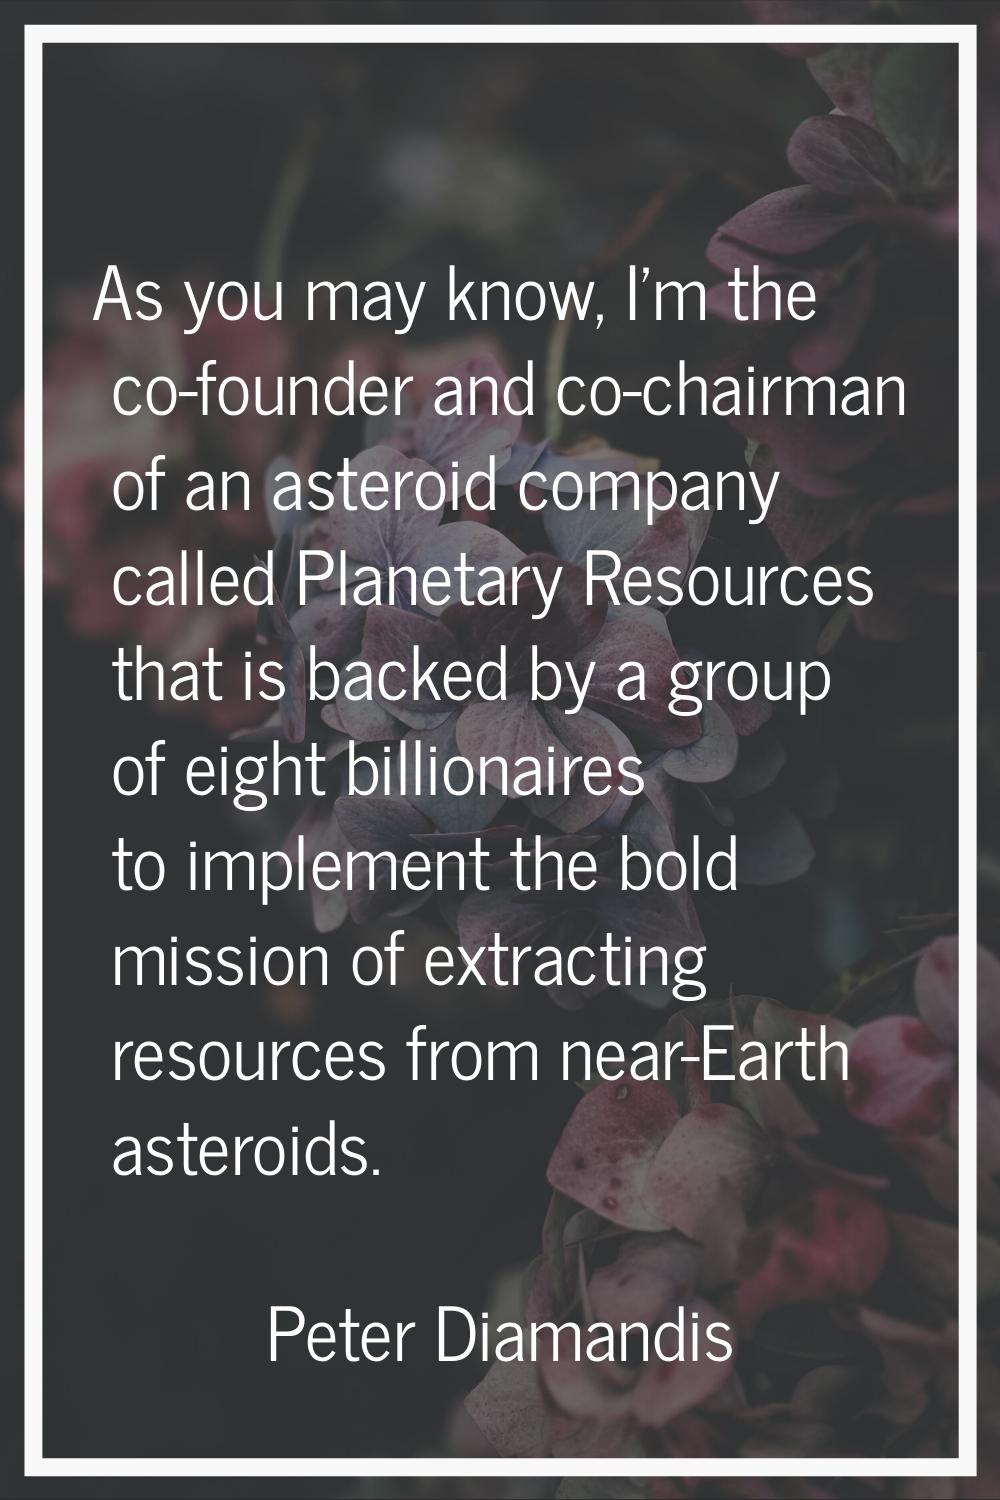 As you may know, I'm the co-founder and co-chairman of an asteroid company called Planetary Resourc